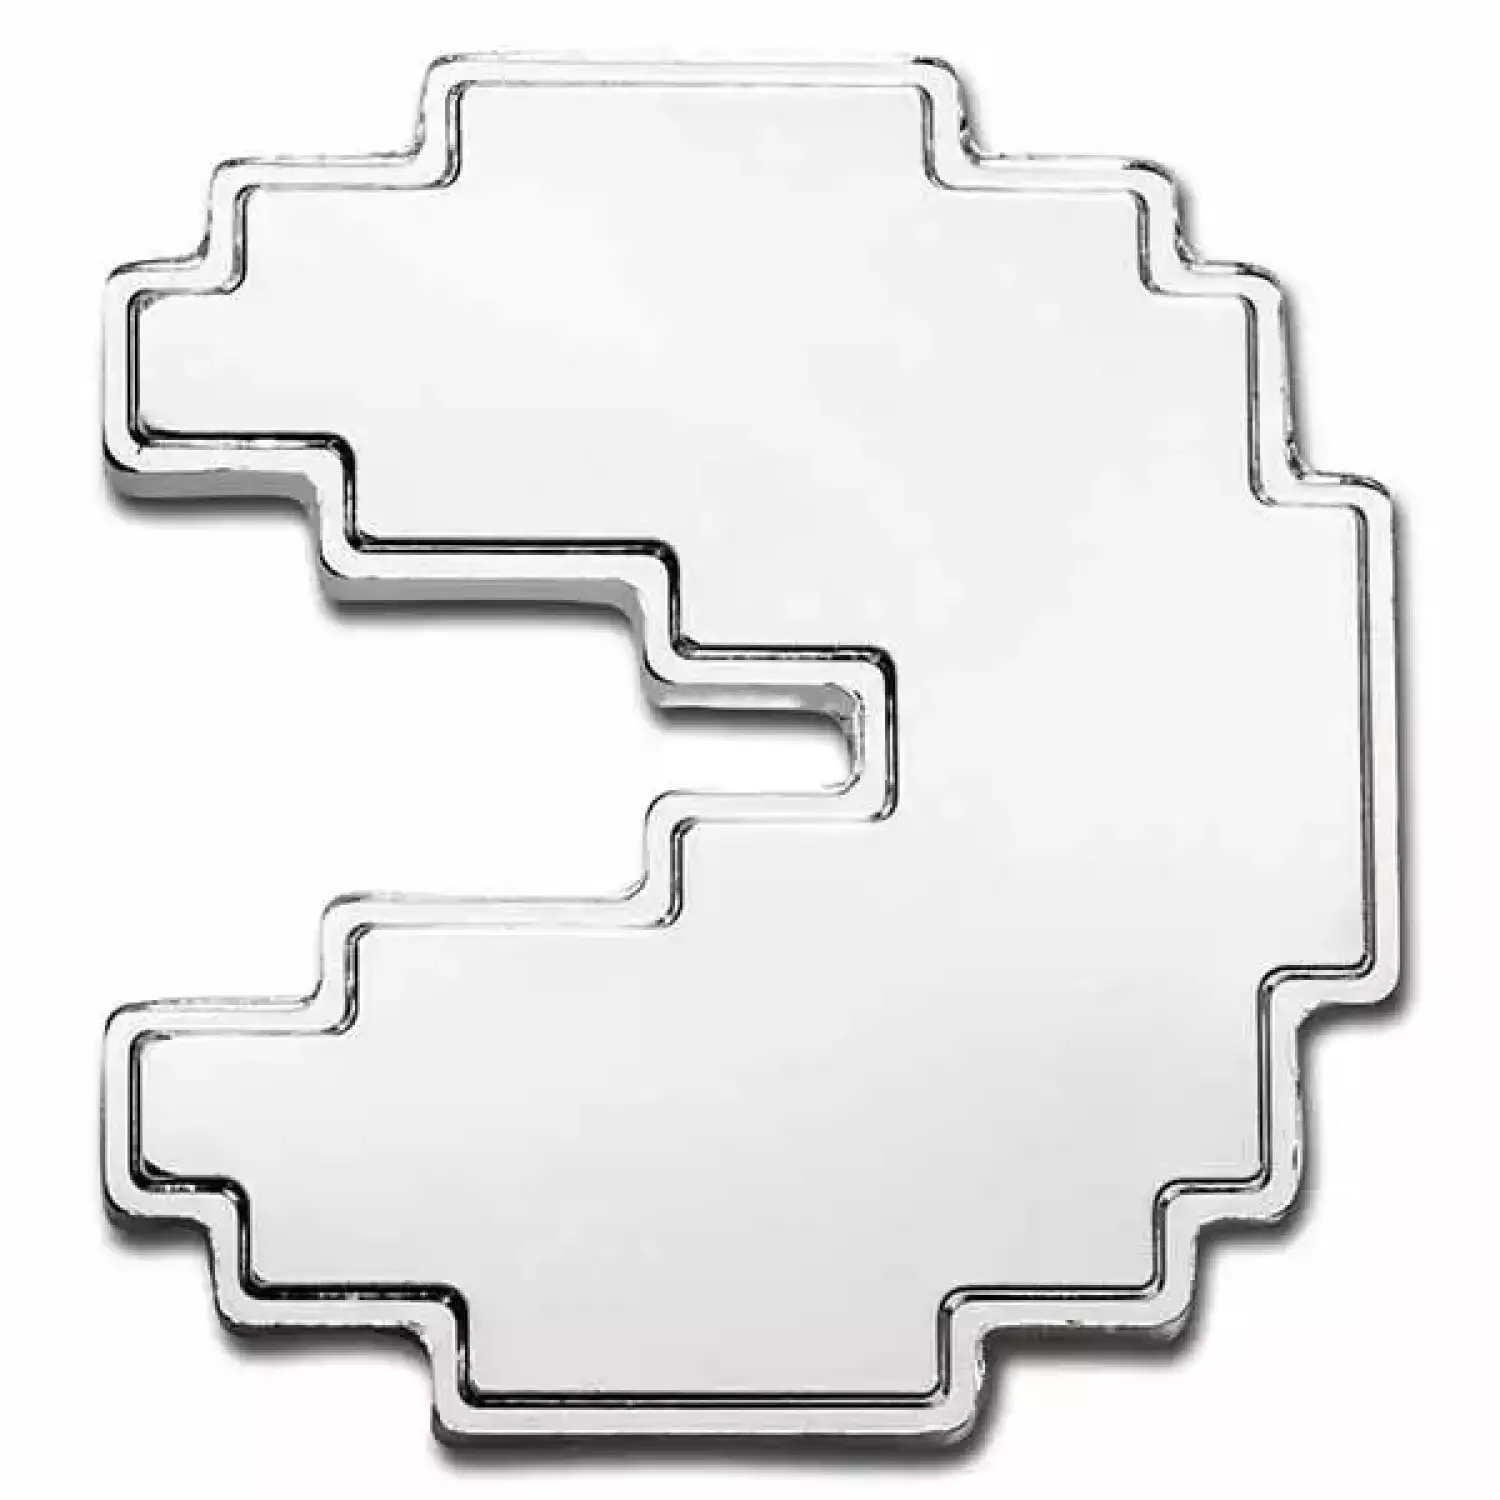 2021 Niue 1 oz Silver $2 PAC-MAN™ Shaped PAC-STACK Stackable Coin